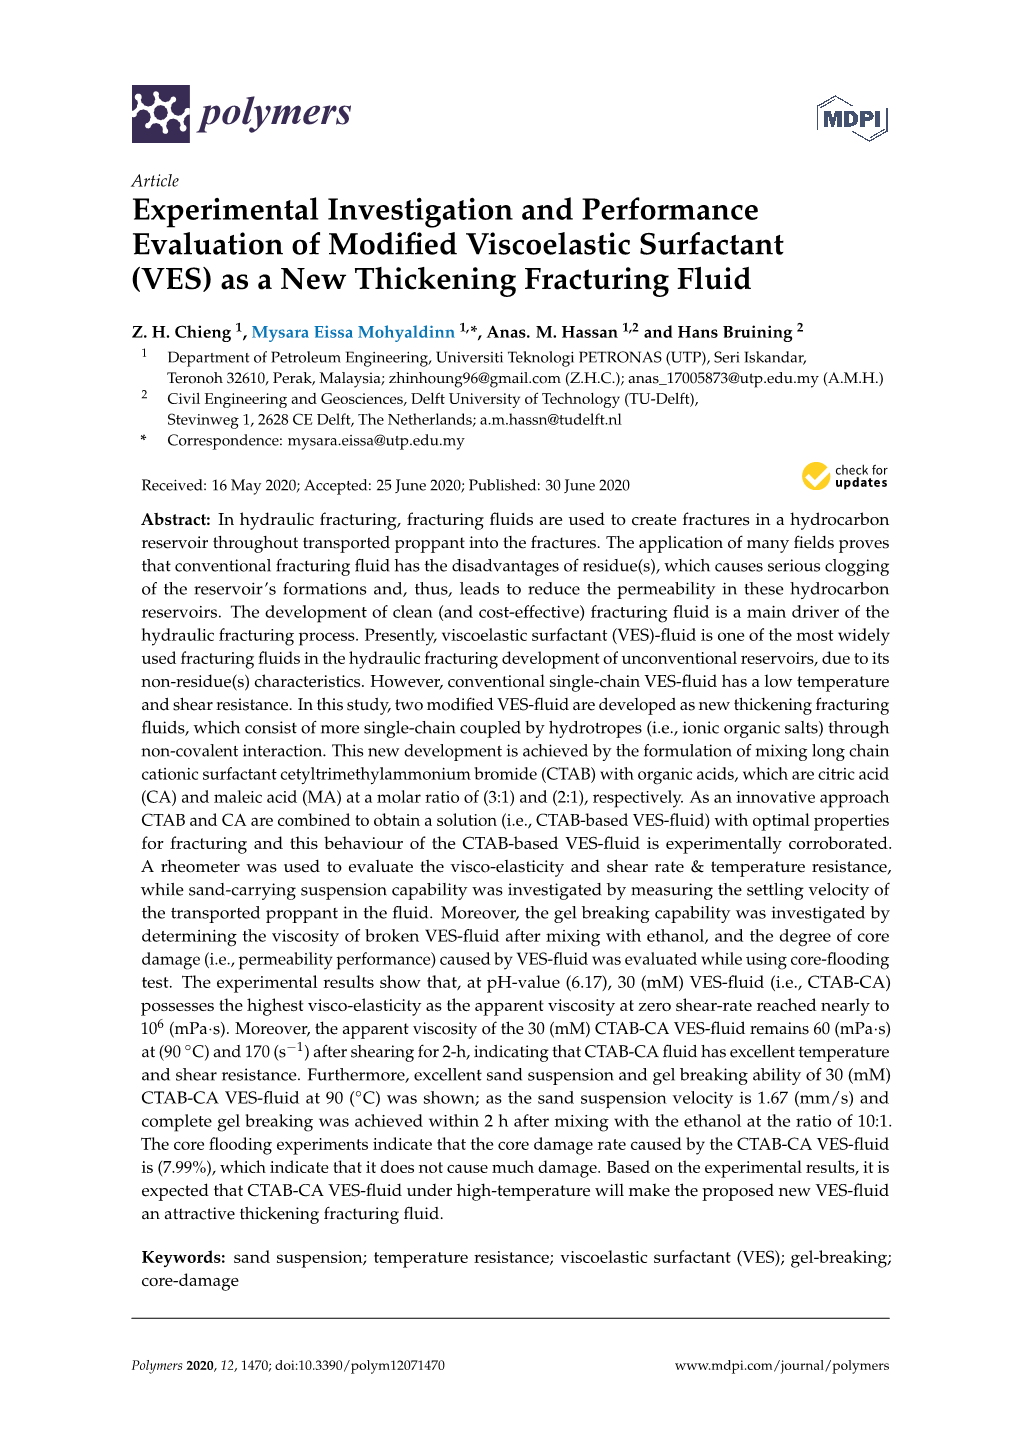 Vestigation and Performance Evaluation of Modiﬁed Viscoelastic Surfactant (VES) As a New Thickening Fracturing Fluid